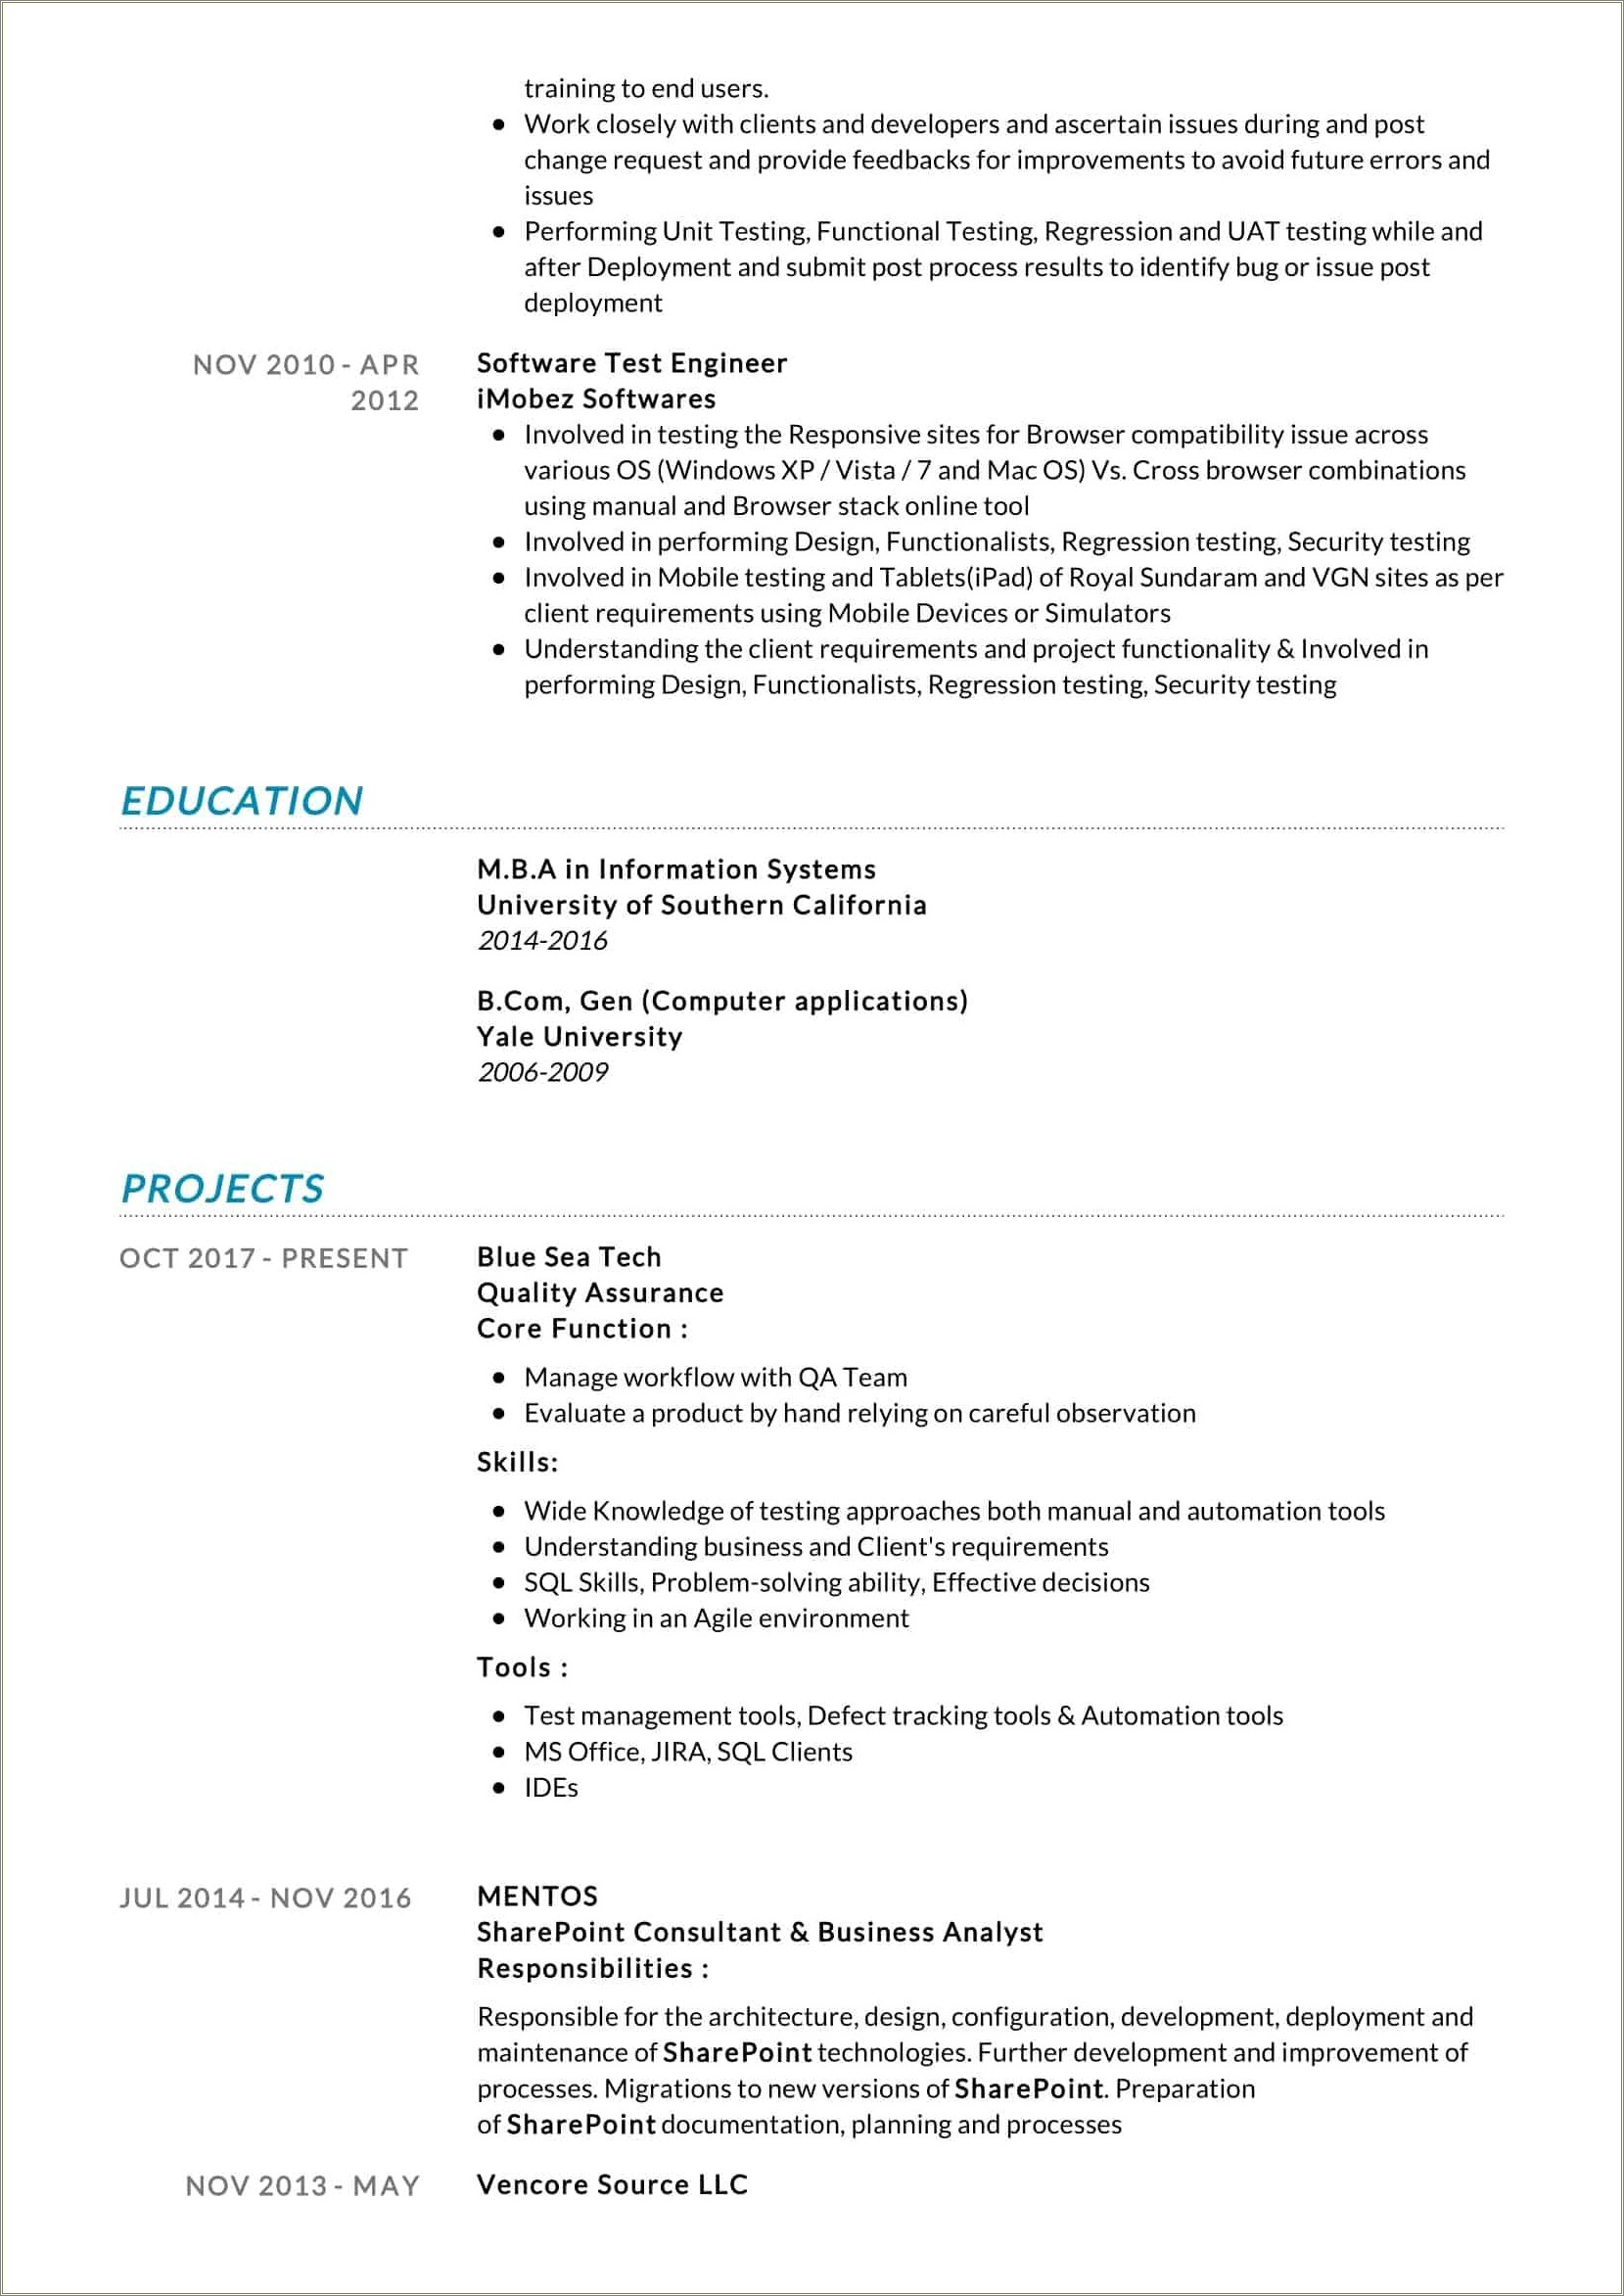 Resume Objective For Quality Assurance Analyst